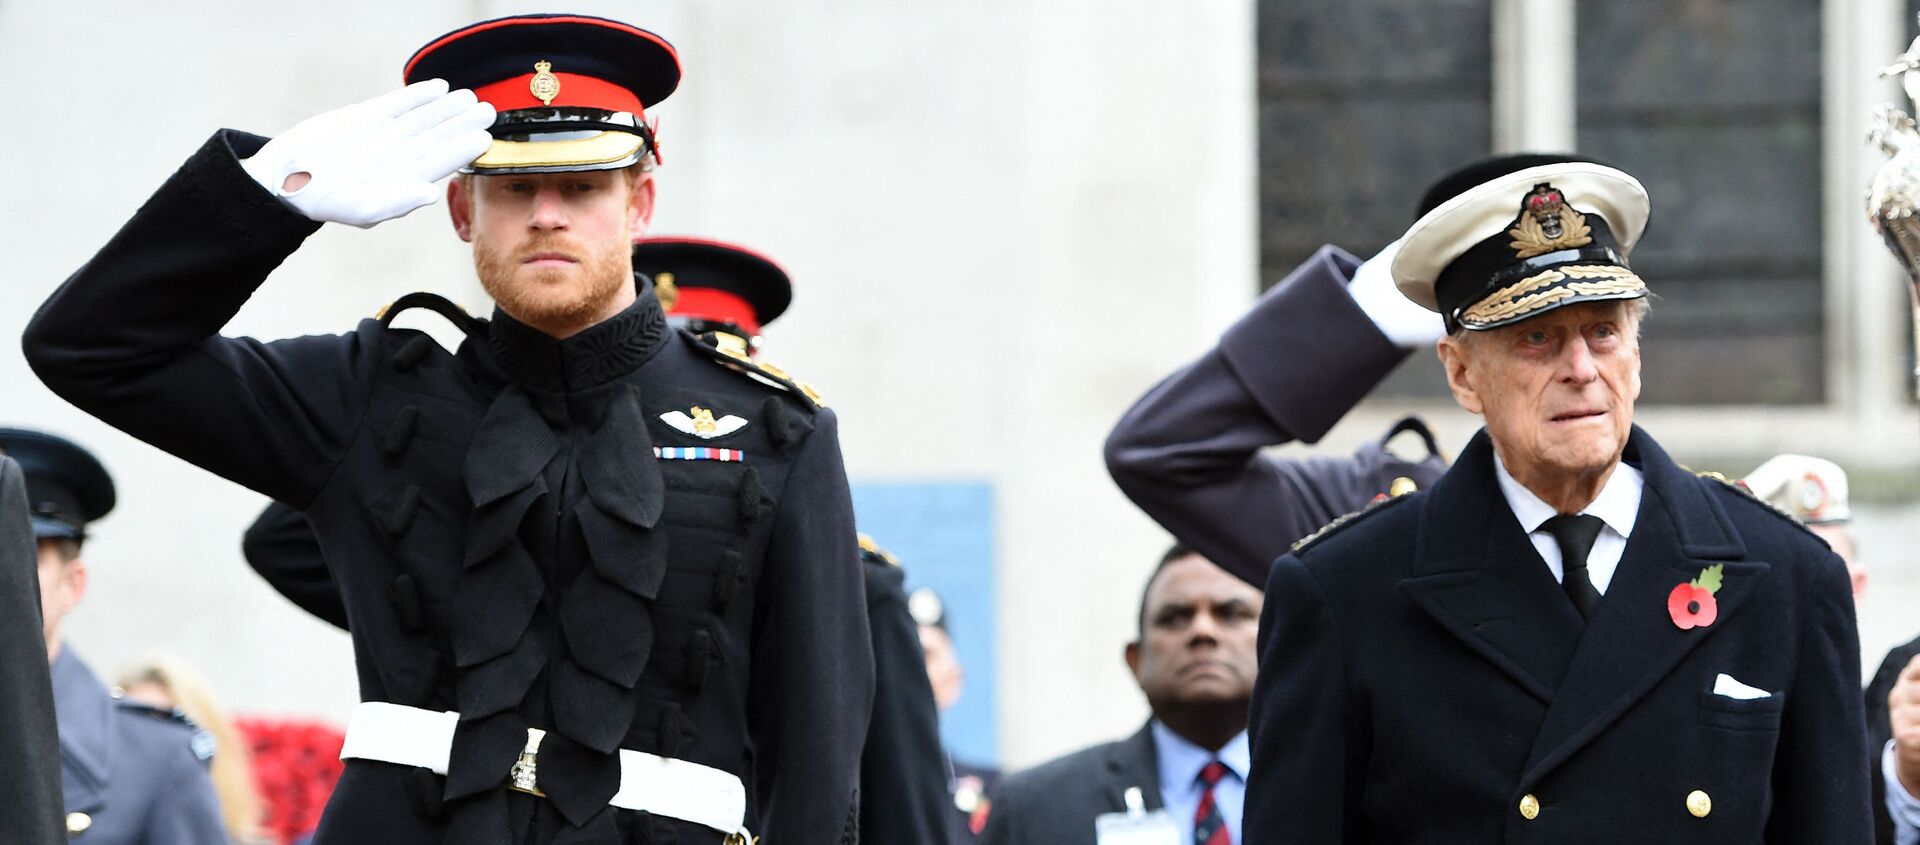 Britain's Prince Harry (L) salutes as he stands alongside his grandfather Britain's Prince Philip, Duke of Edinburgh, during their visit to the Field of Remembrance at Westminster Abbey in central London on November 10, 2016. - Sputnik International, 1920, 18.02.2021